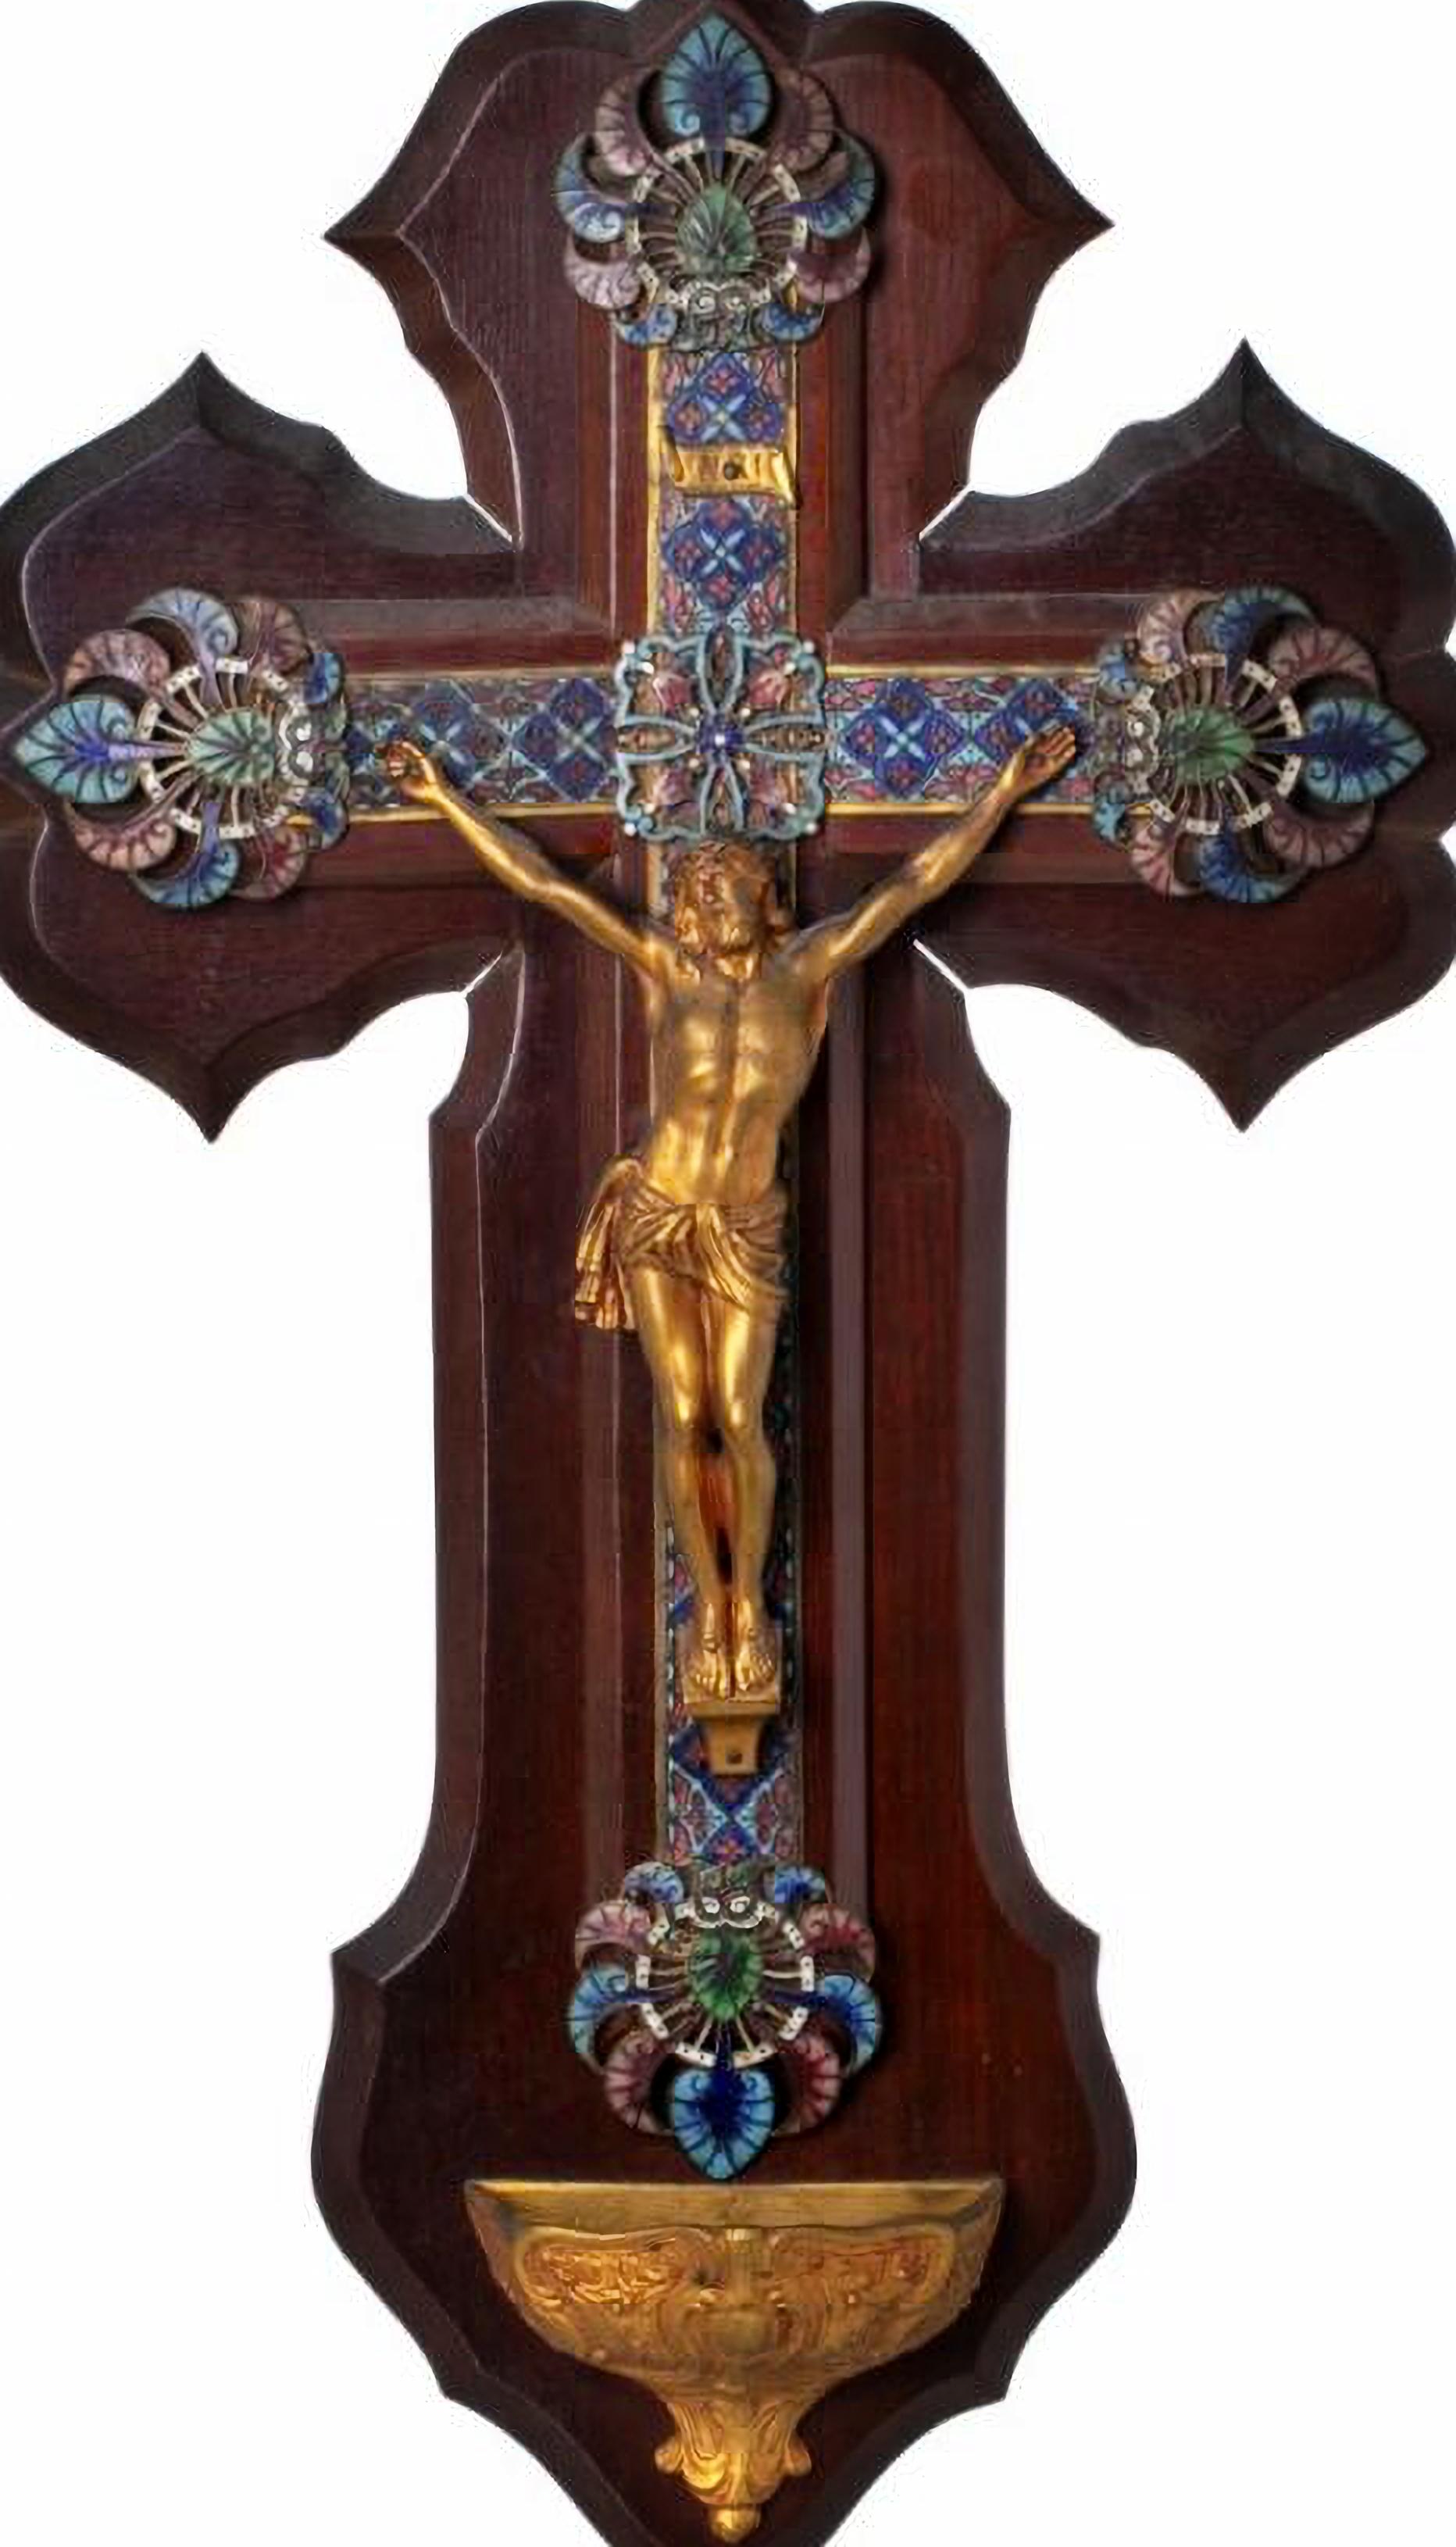 JESUS CHRIST CRUCIFIED
European, Germany ? 19th century
Christ and font in bronze, wooden cross, covered with enamel. 
Slight wear. 
Dim.: (cross) 50 x 30 cm; 
Height: (christ) 16 cm
very good condition